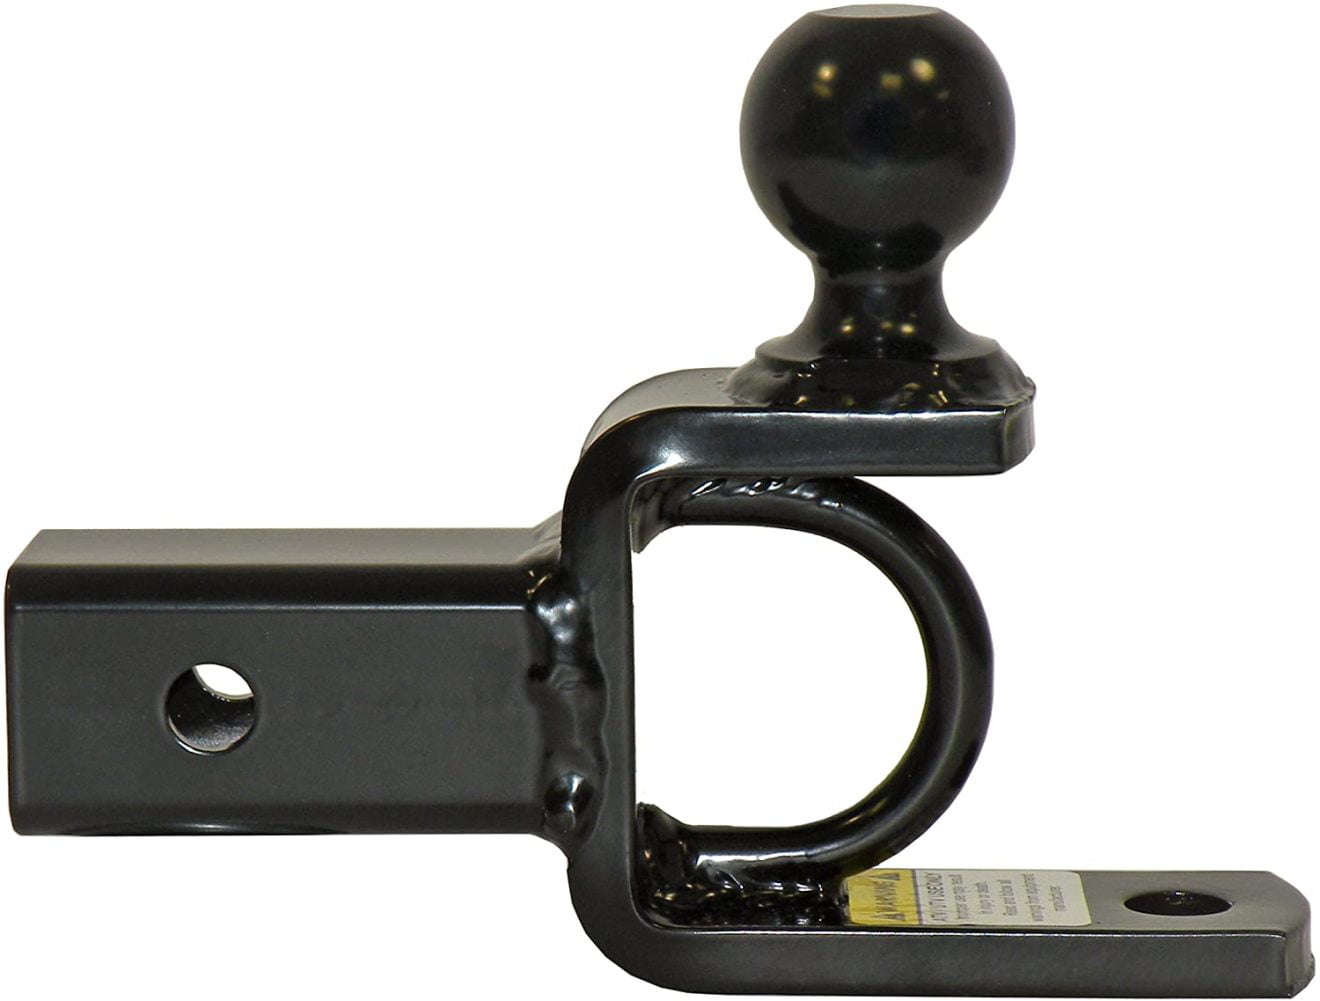 ATV/UTV Ball Mount For 2 Inch Receivers With 2 Inch Hitch Ball Made In U.S.A. 